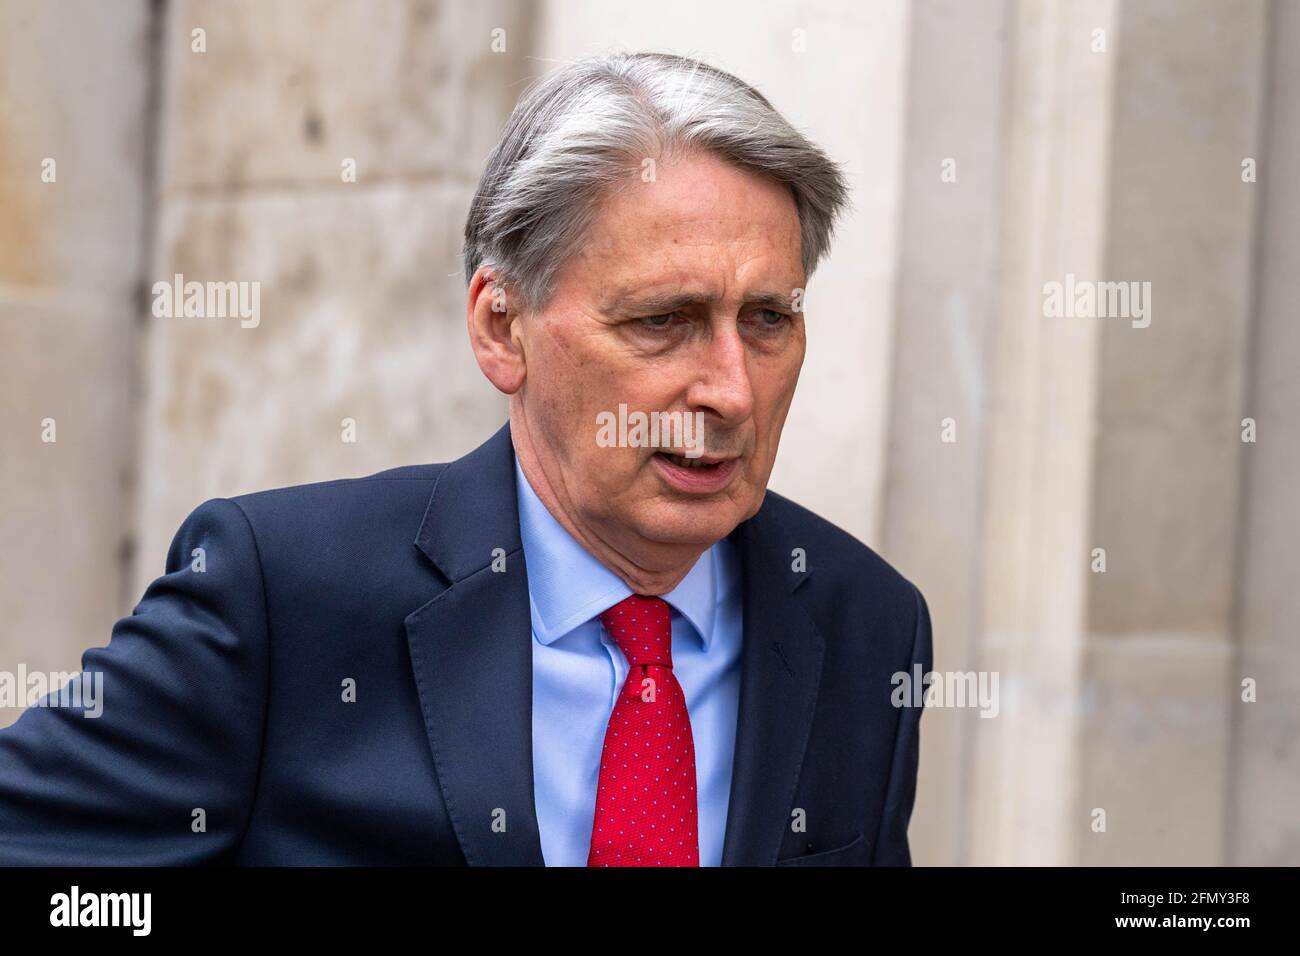 London, UK. 12th May, 2021. Philip Hammond, Baron Hammond of Runnymede PC  is a life peer who served as Chancellor of the Exchequer from 2016 to 2019, Foreign  Secretary from 2014 to